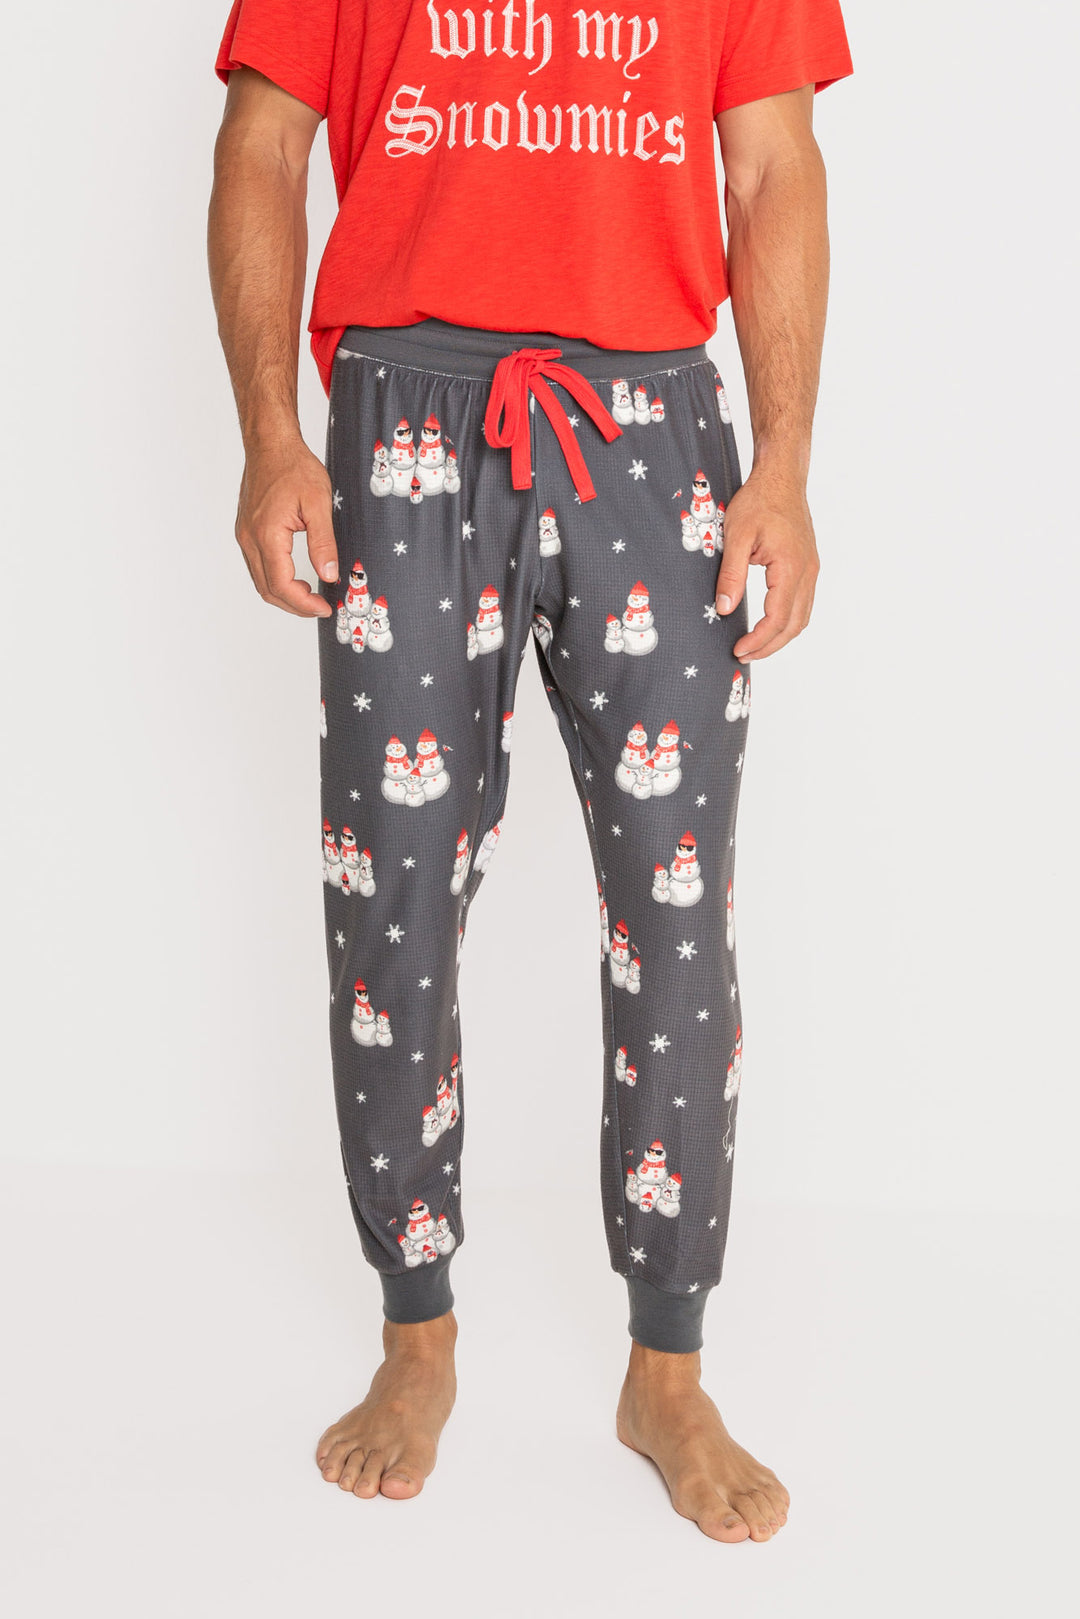 Men's pajama pant in grey thermal velour with festive snowman print. Red tie-waist. (7257679921252)